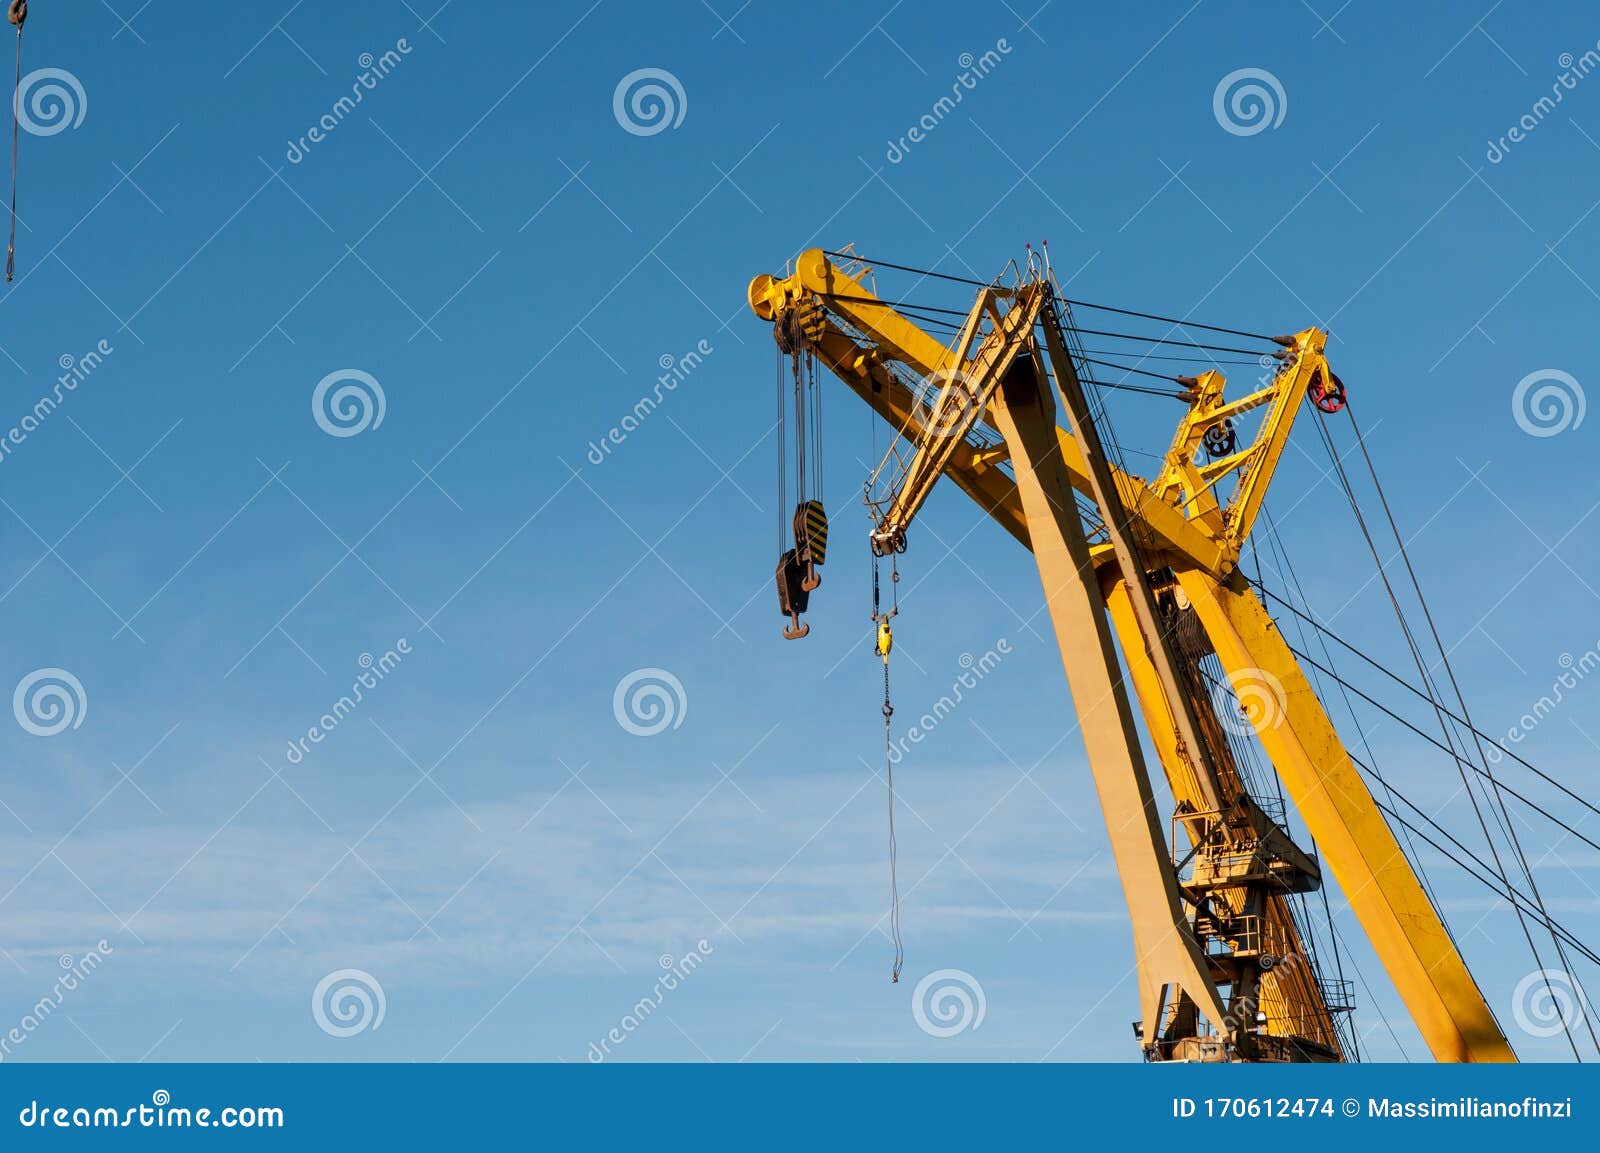 yellow tower crane with blue sky